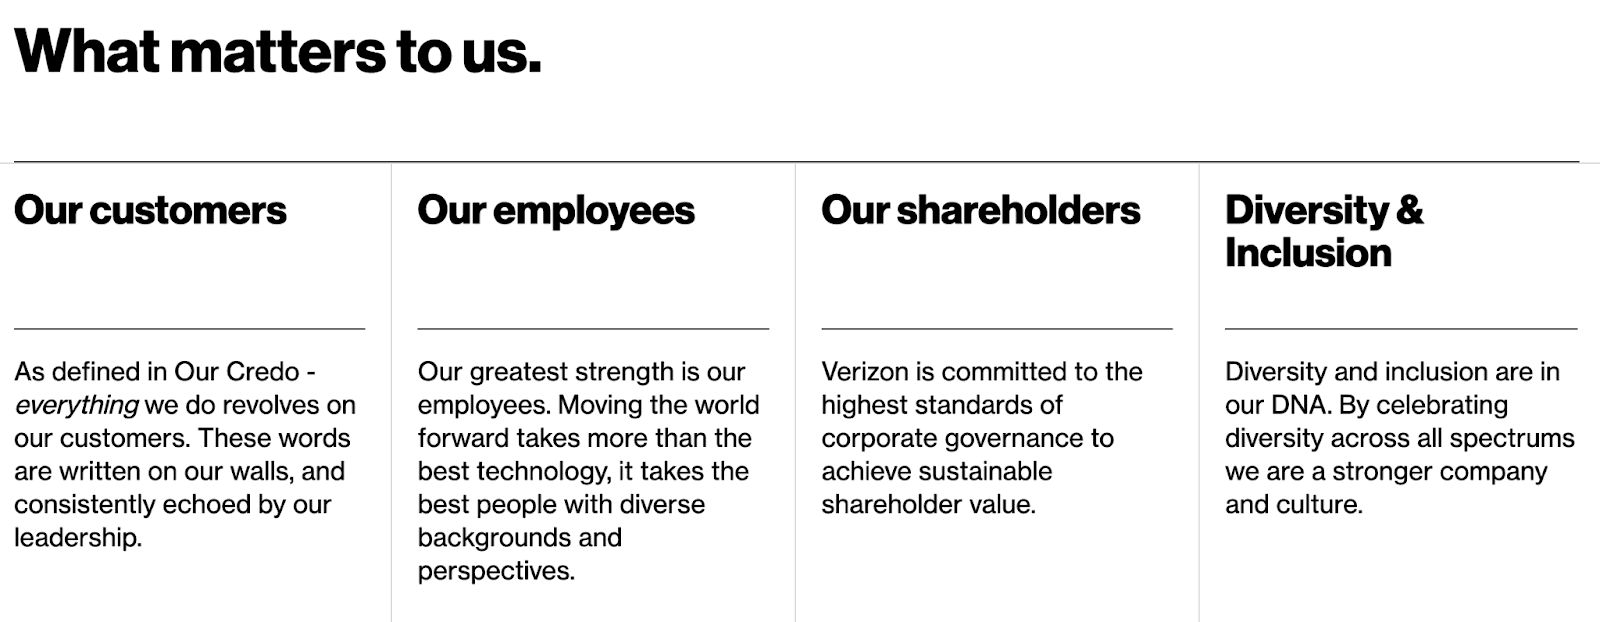 Verizon states their values as what matters to them, which is listed as our customers, our employees, our shareholders, and diversity and inclusion. 